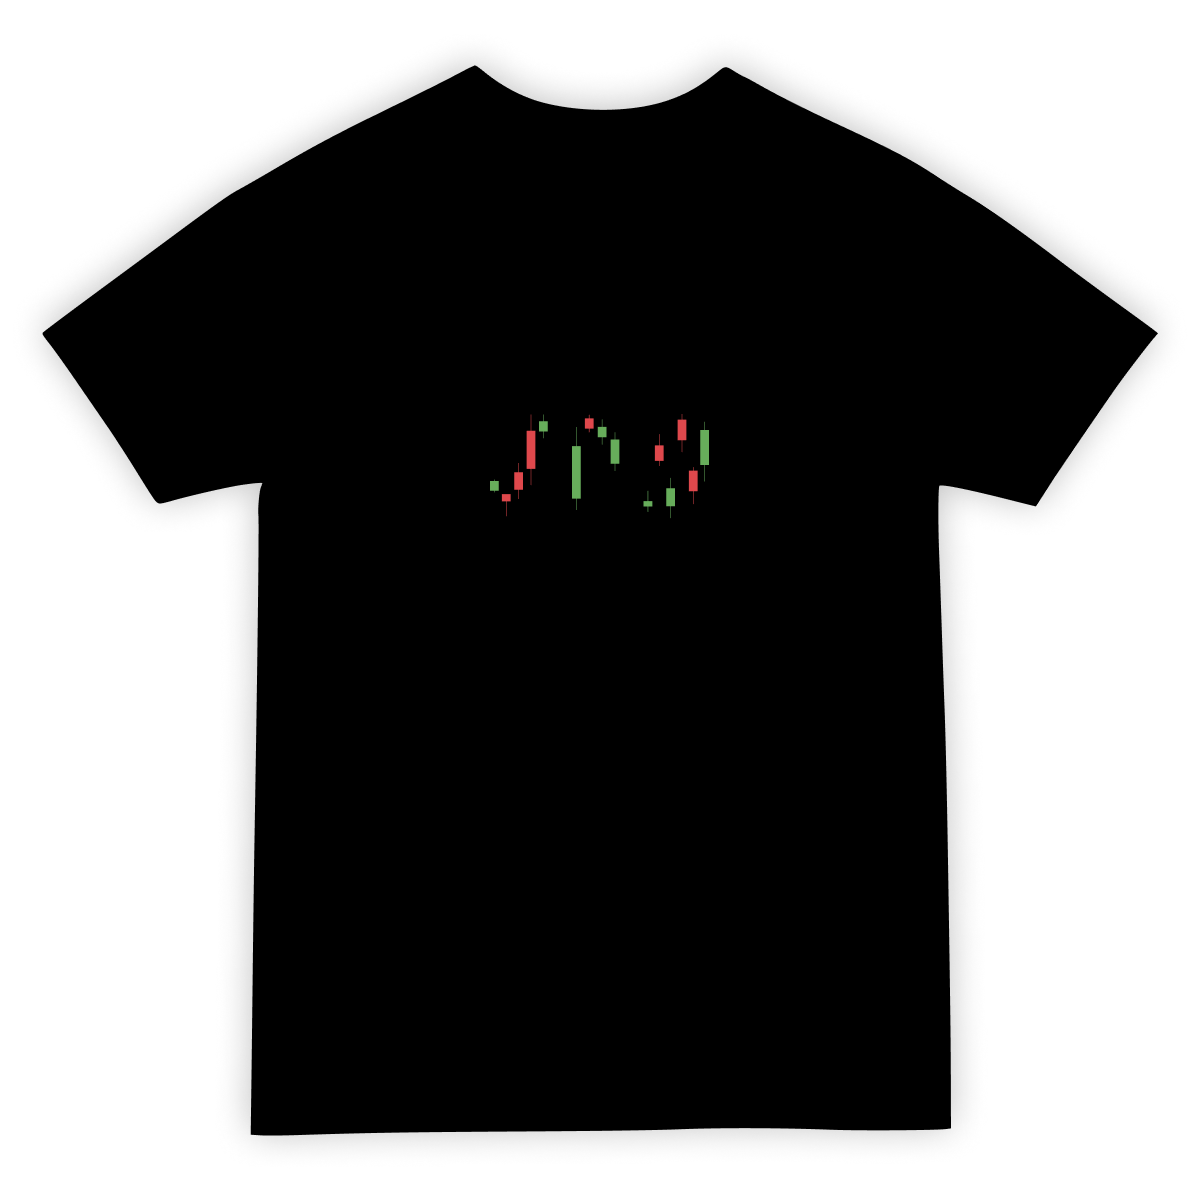 A t-shirt design. The word JPG written using the stocktrading candle chart.